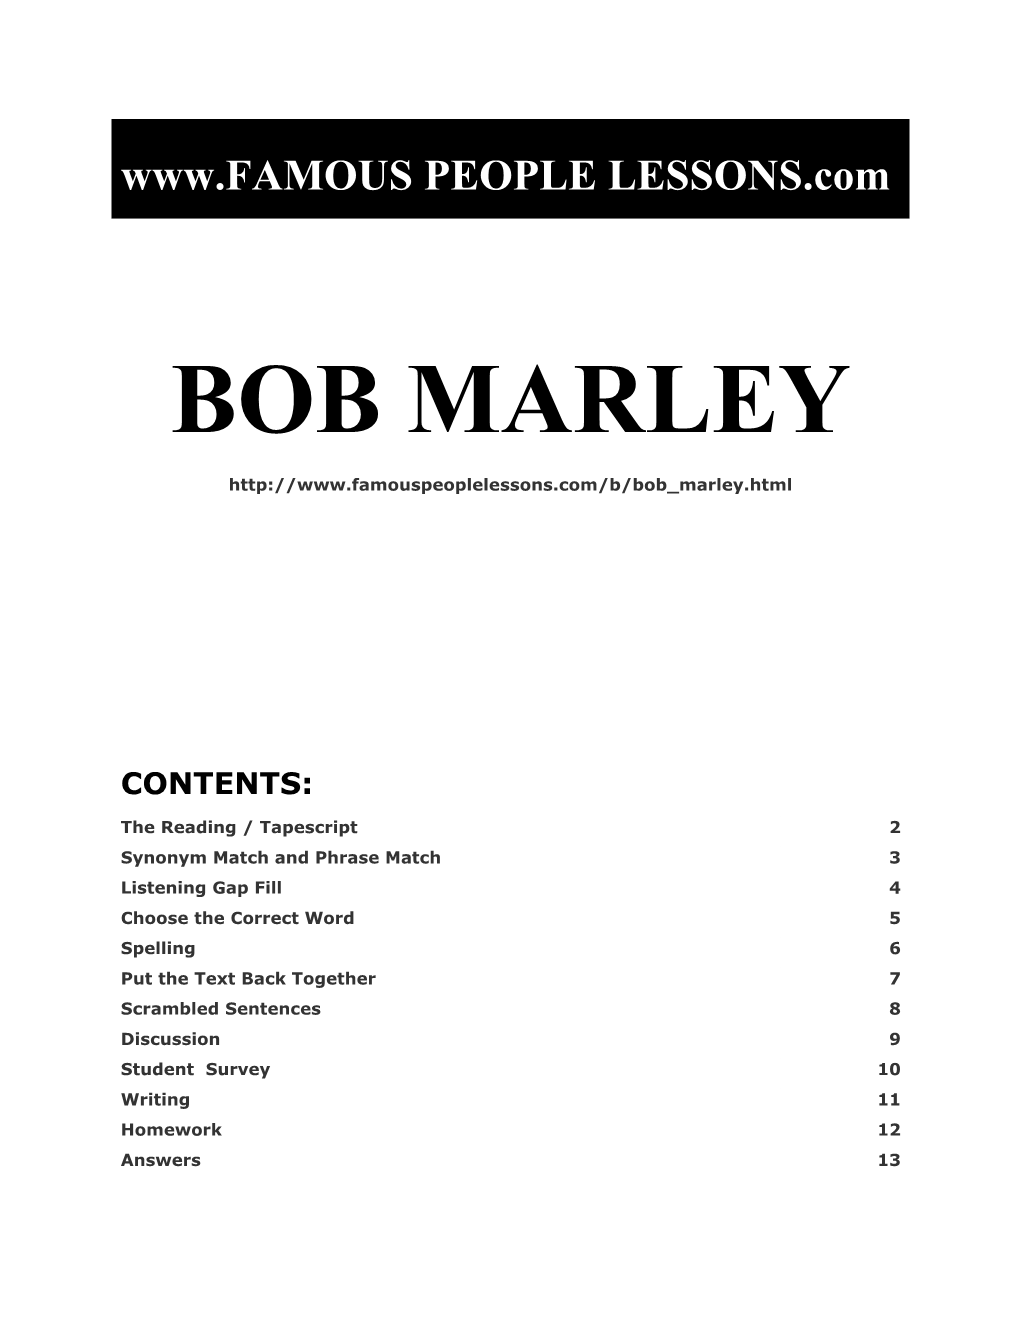 Famous People Lessons - Bob Marley